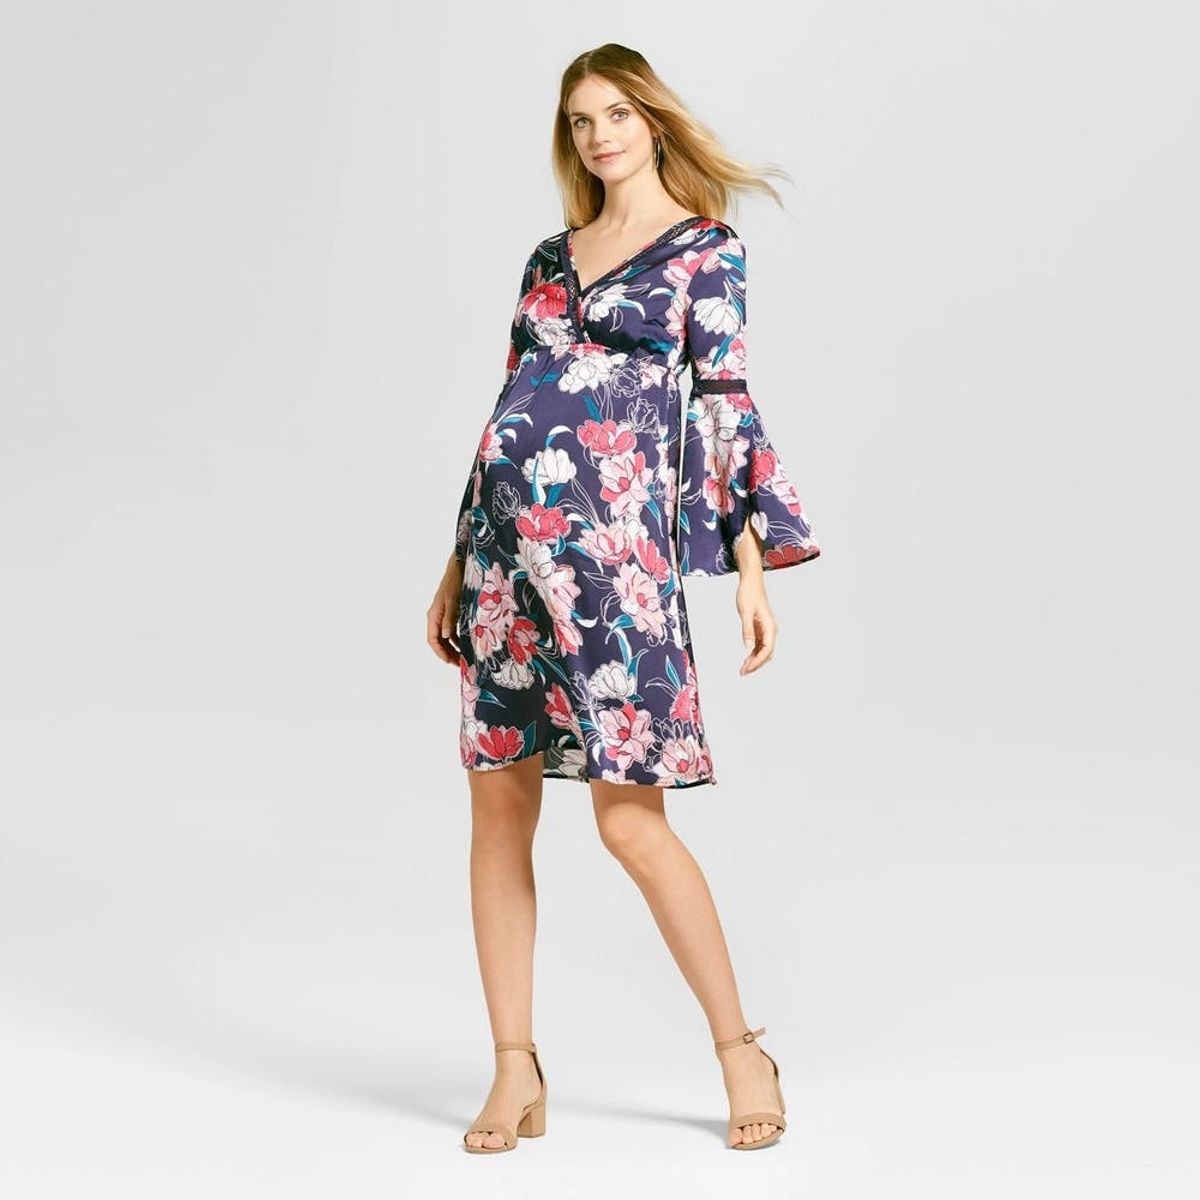 9 Maternity Dresses That Are Perfect for a Summer Wedding